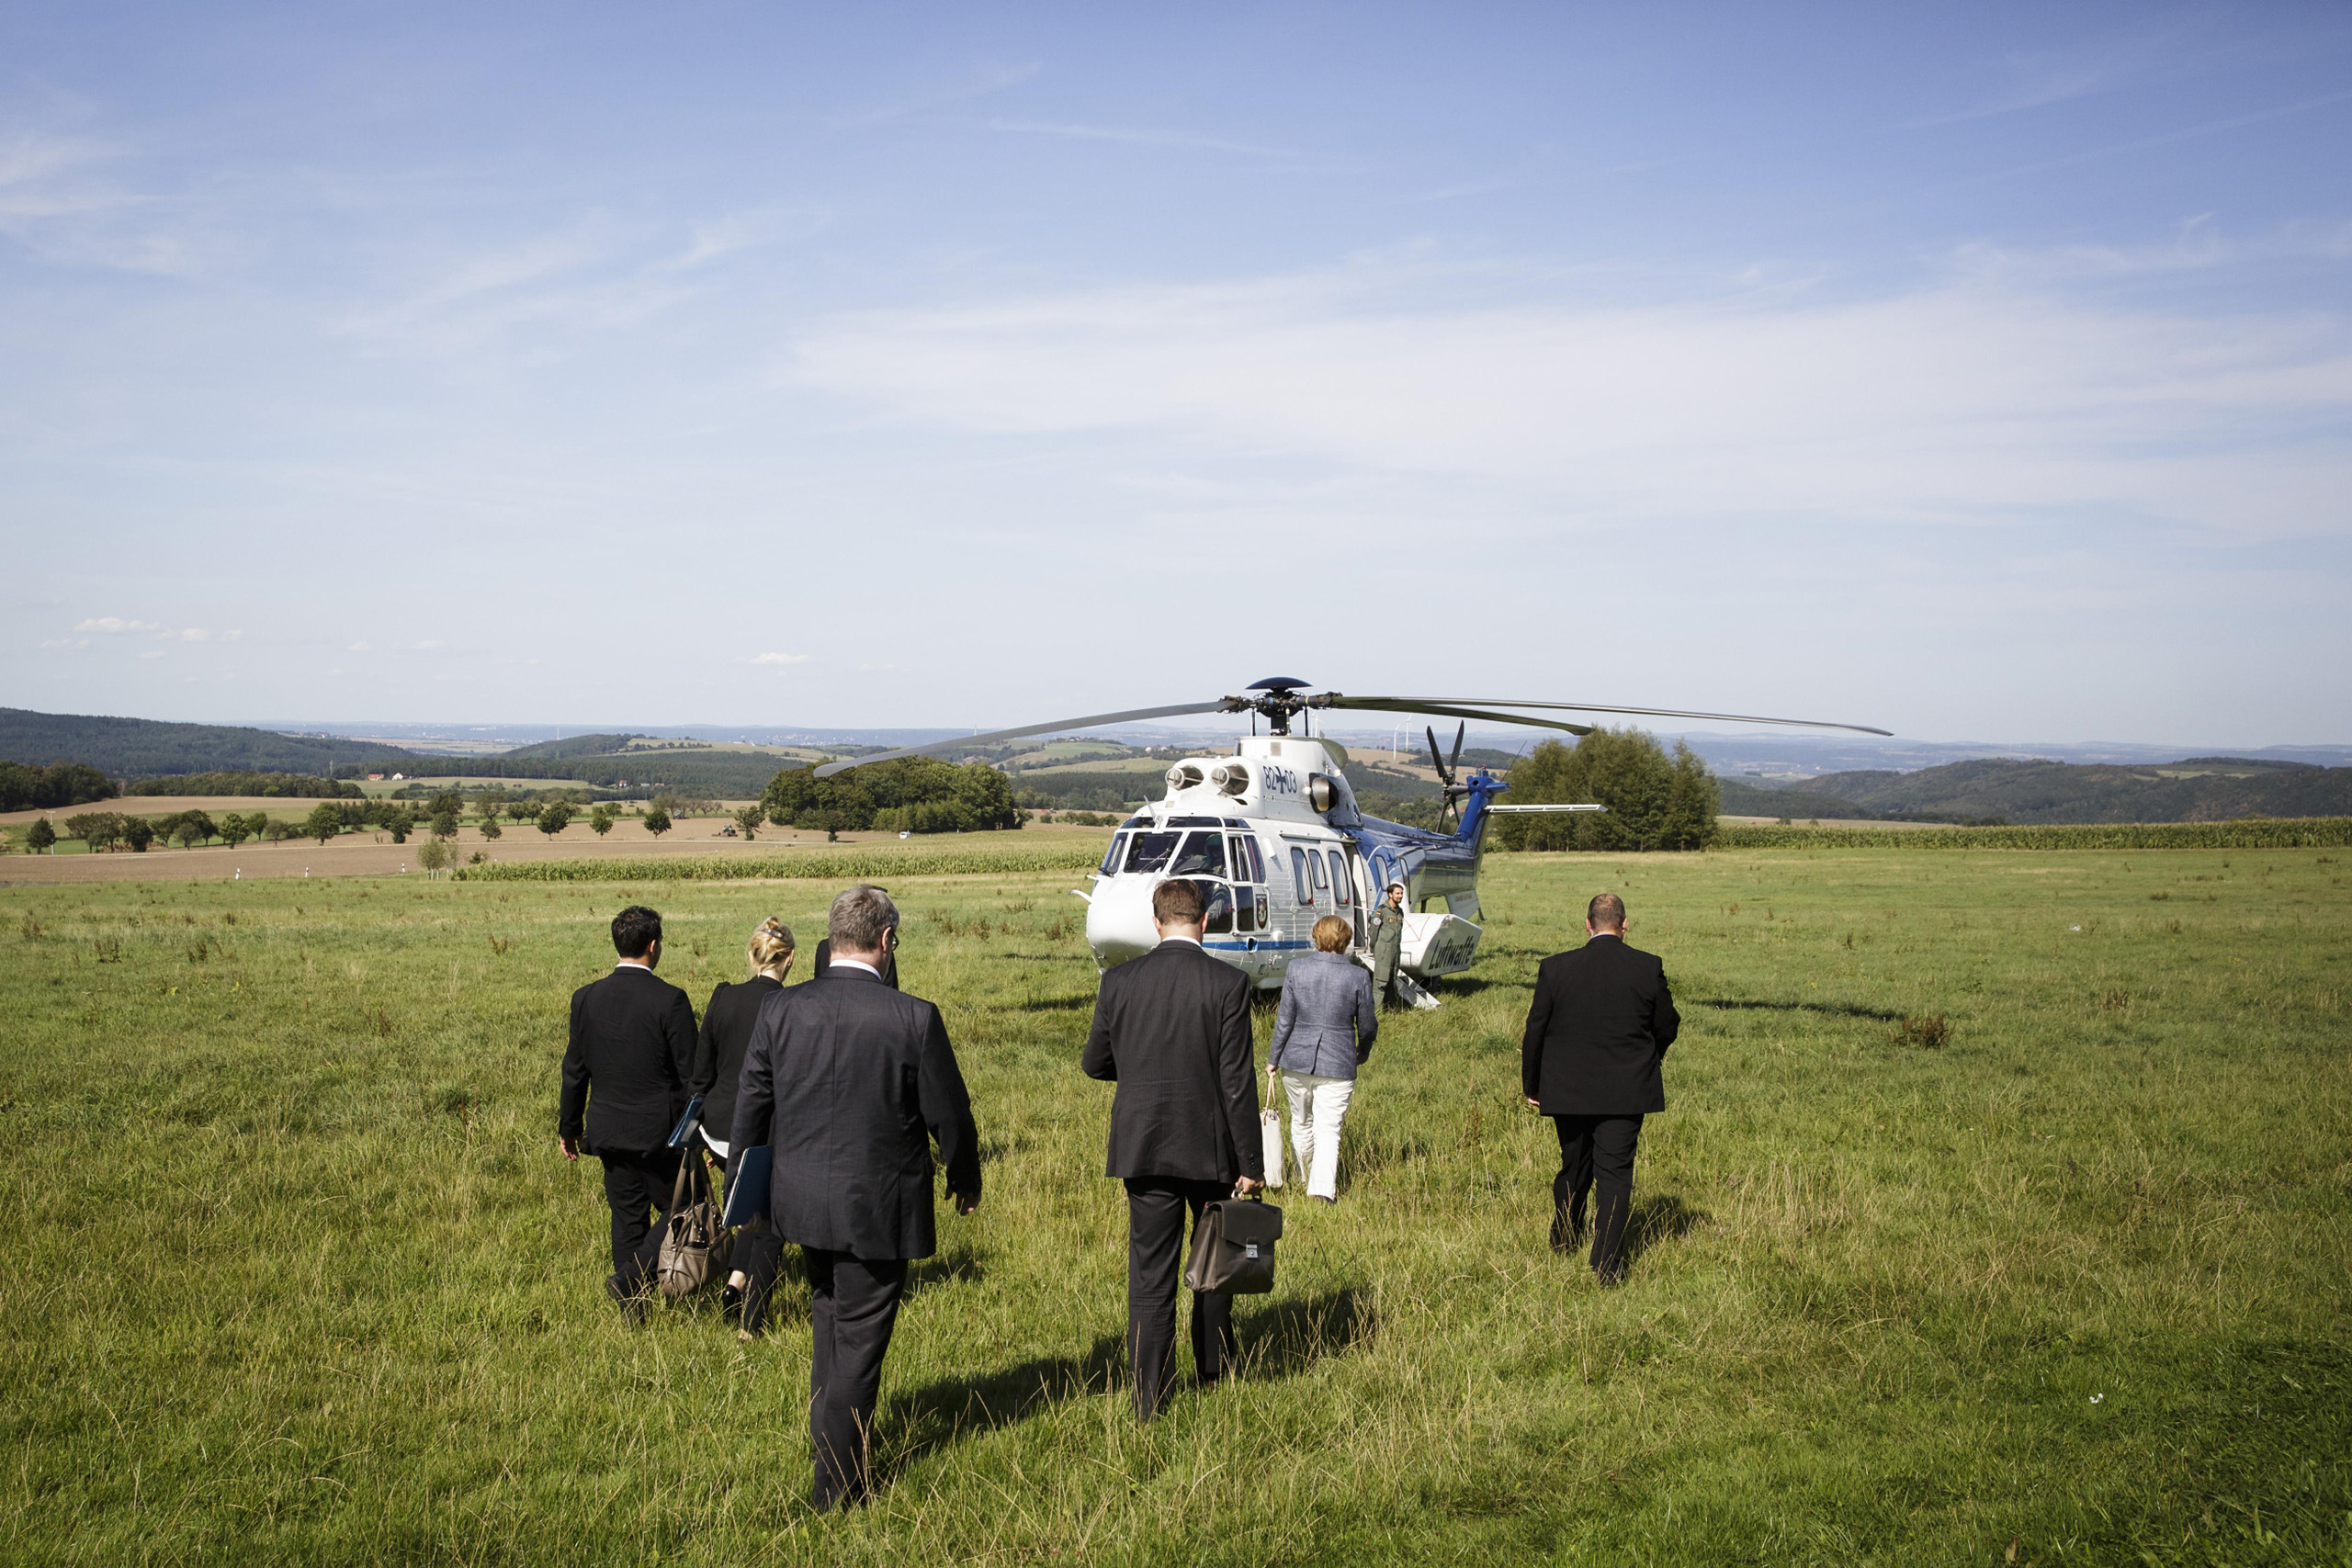 Chancellor Angela Merkel about to bord a police helicopter after a visit at renowned German watch manufacturer Lange in Glashütte. Sept. 20, 2010.